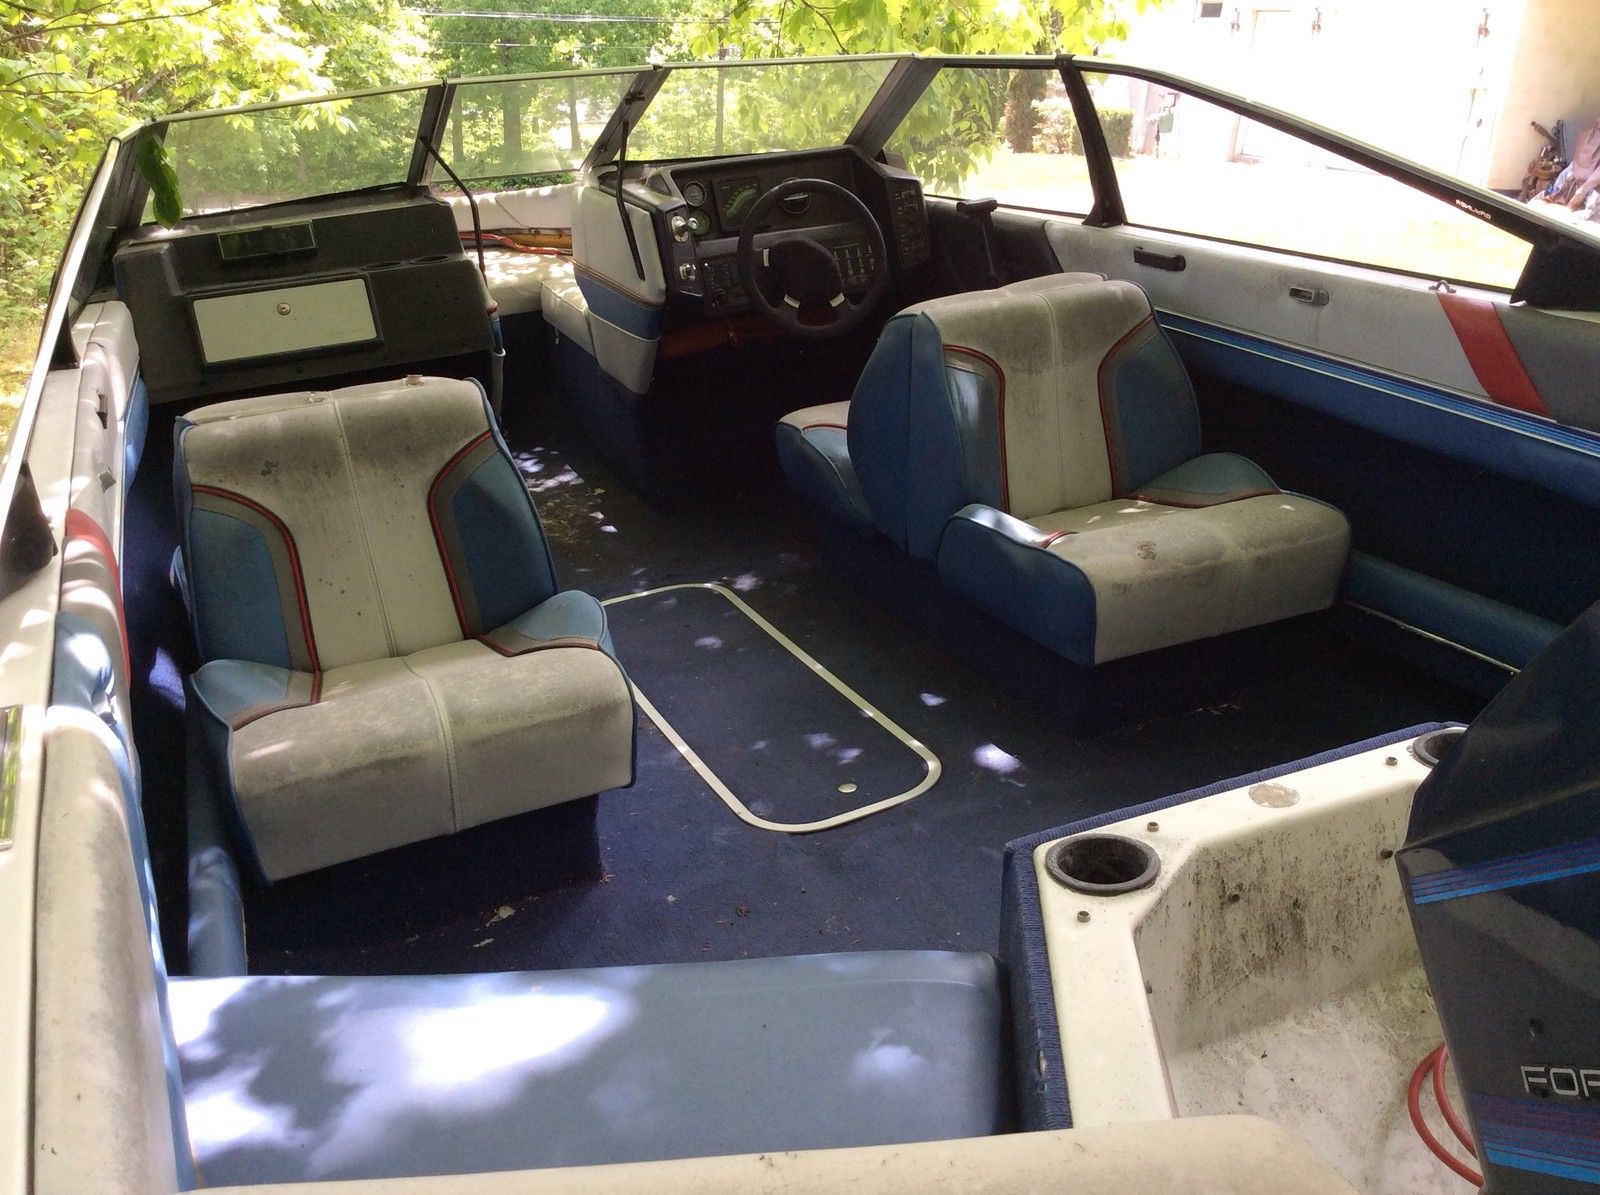 Bayliner Capri 1987 for sale for $100 - Boats-from-USA.com